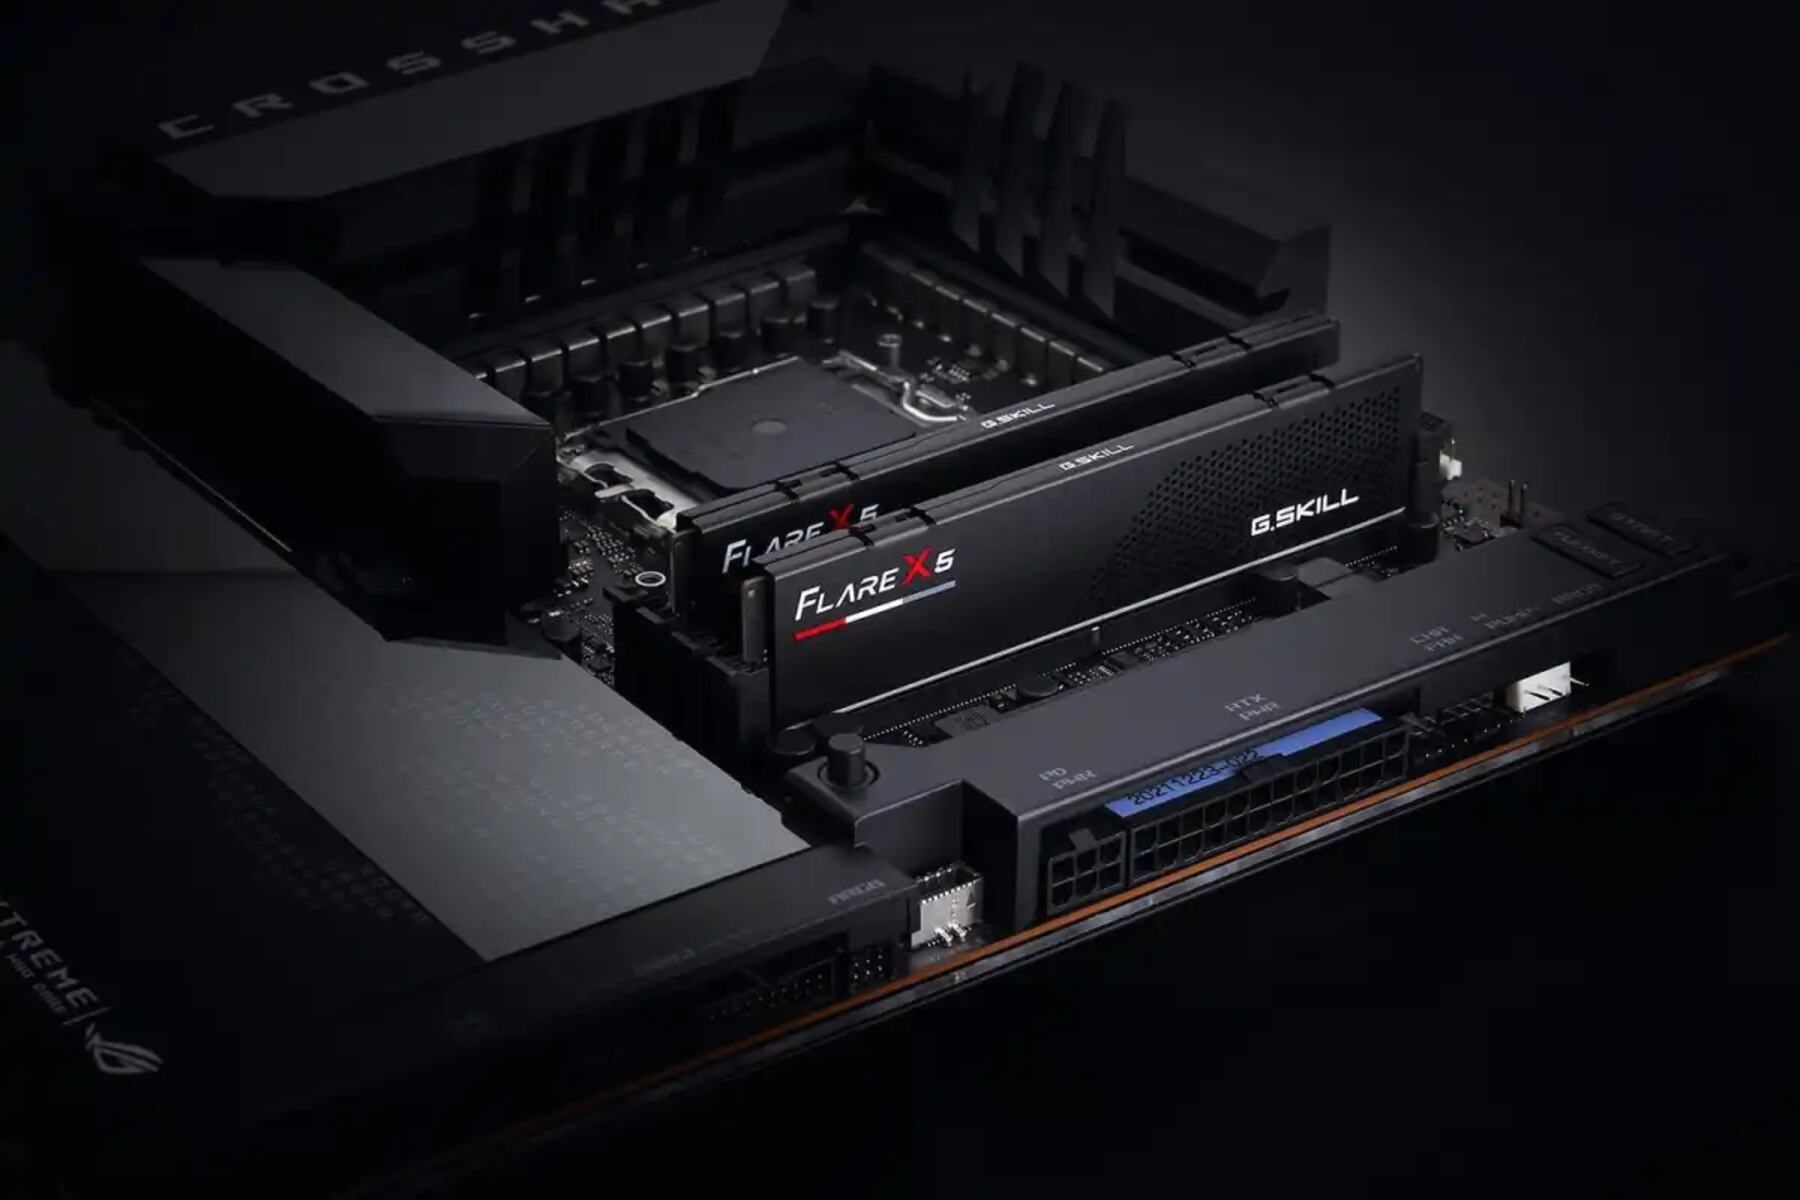 Which Slots Are For Dual Channel RAM?